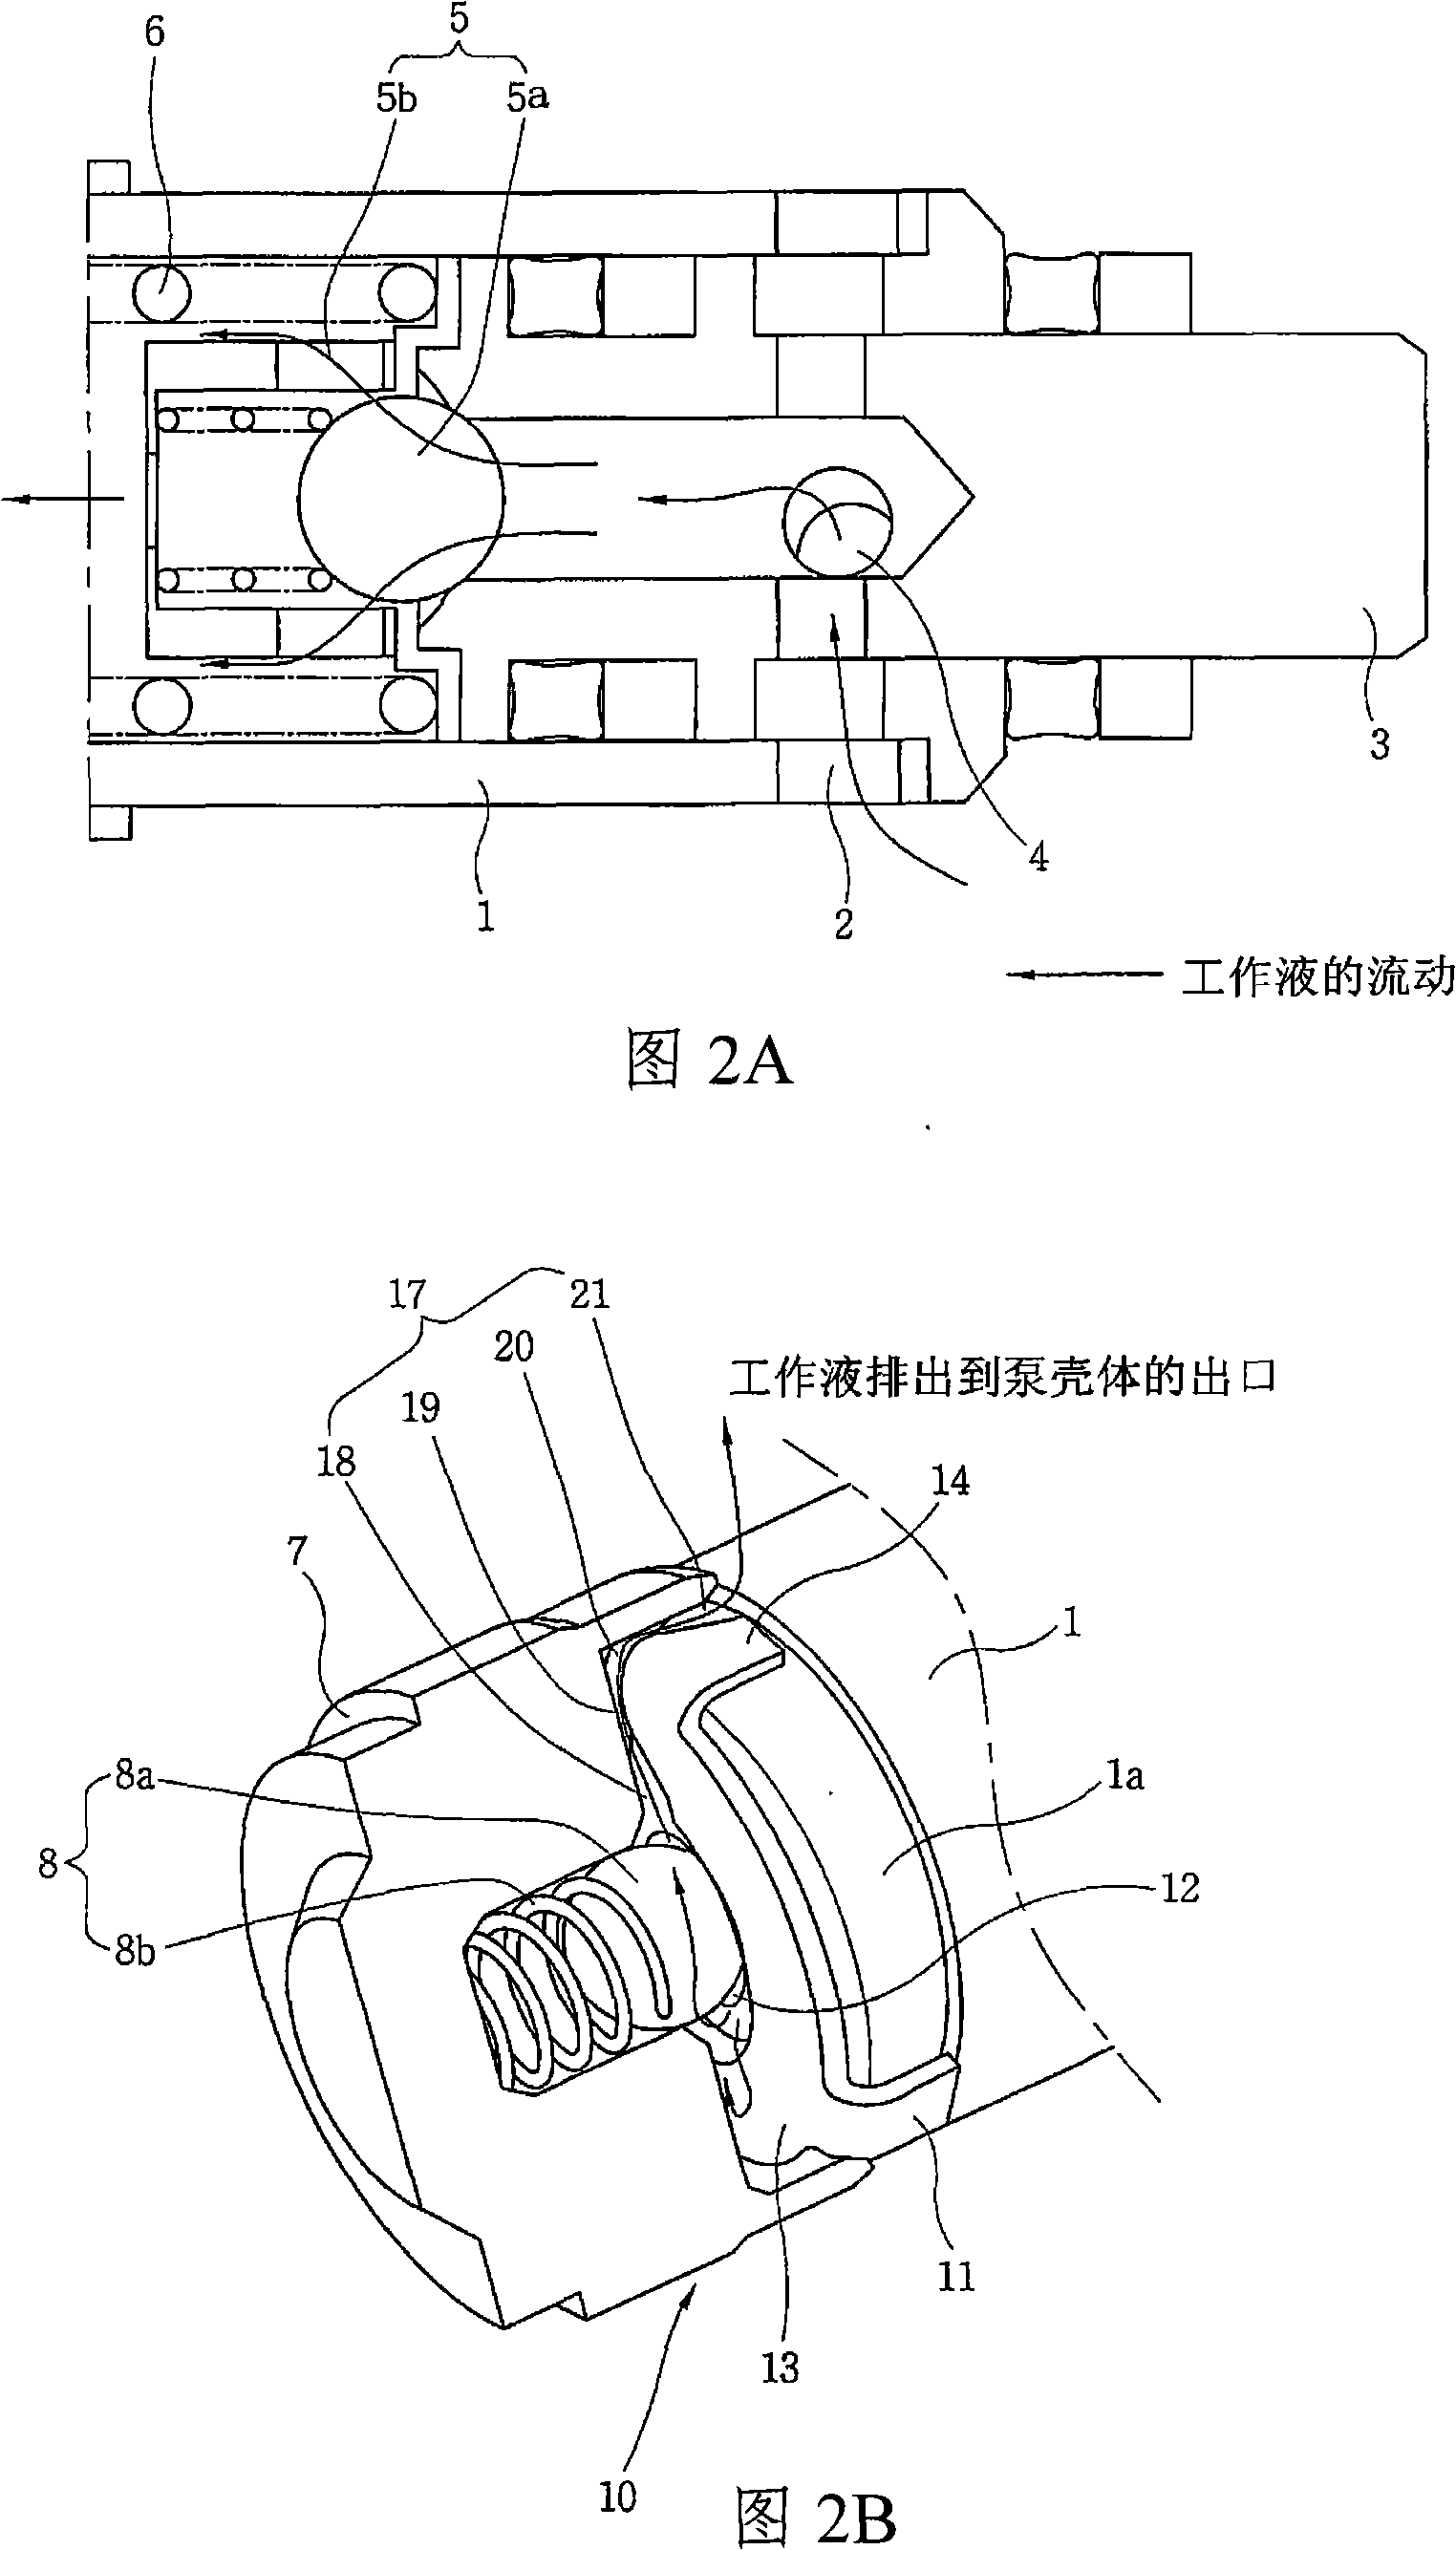 Pressure type pump reducing pulsation for vehicle slip control system